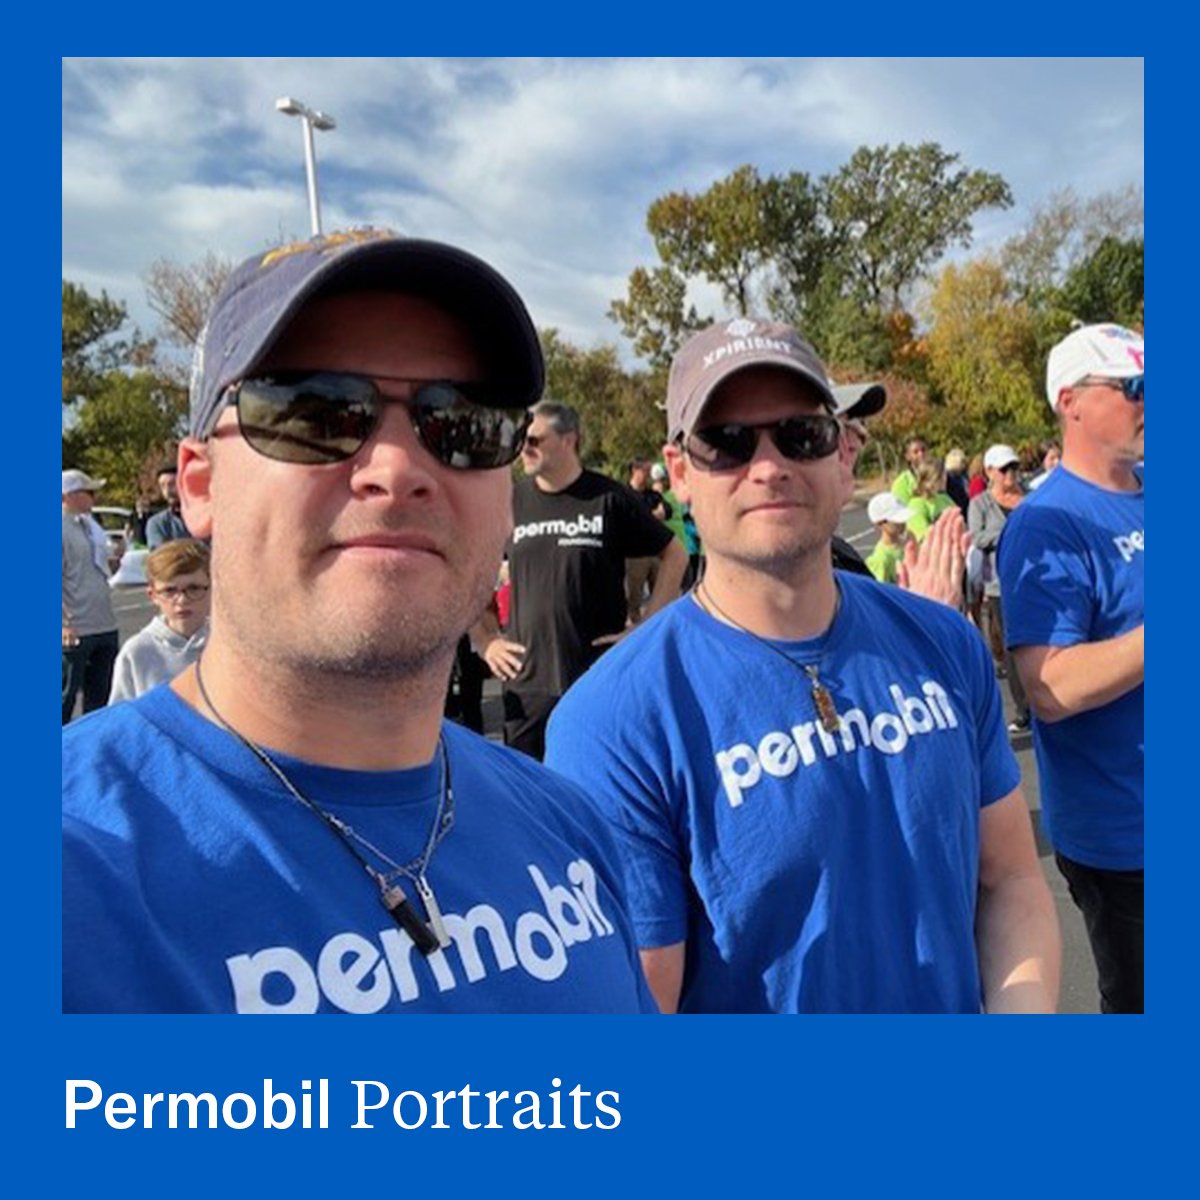 Permobil Portrait: Guy and Roy Henningsson